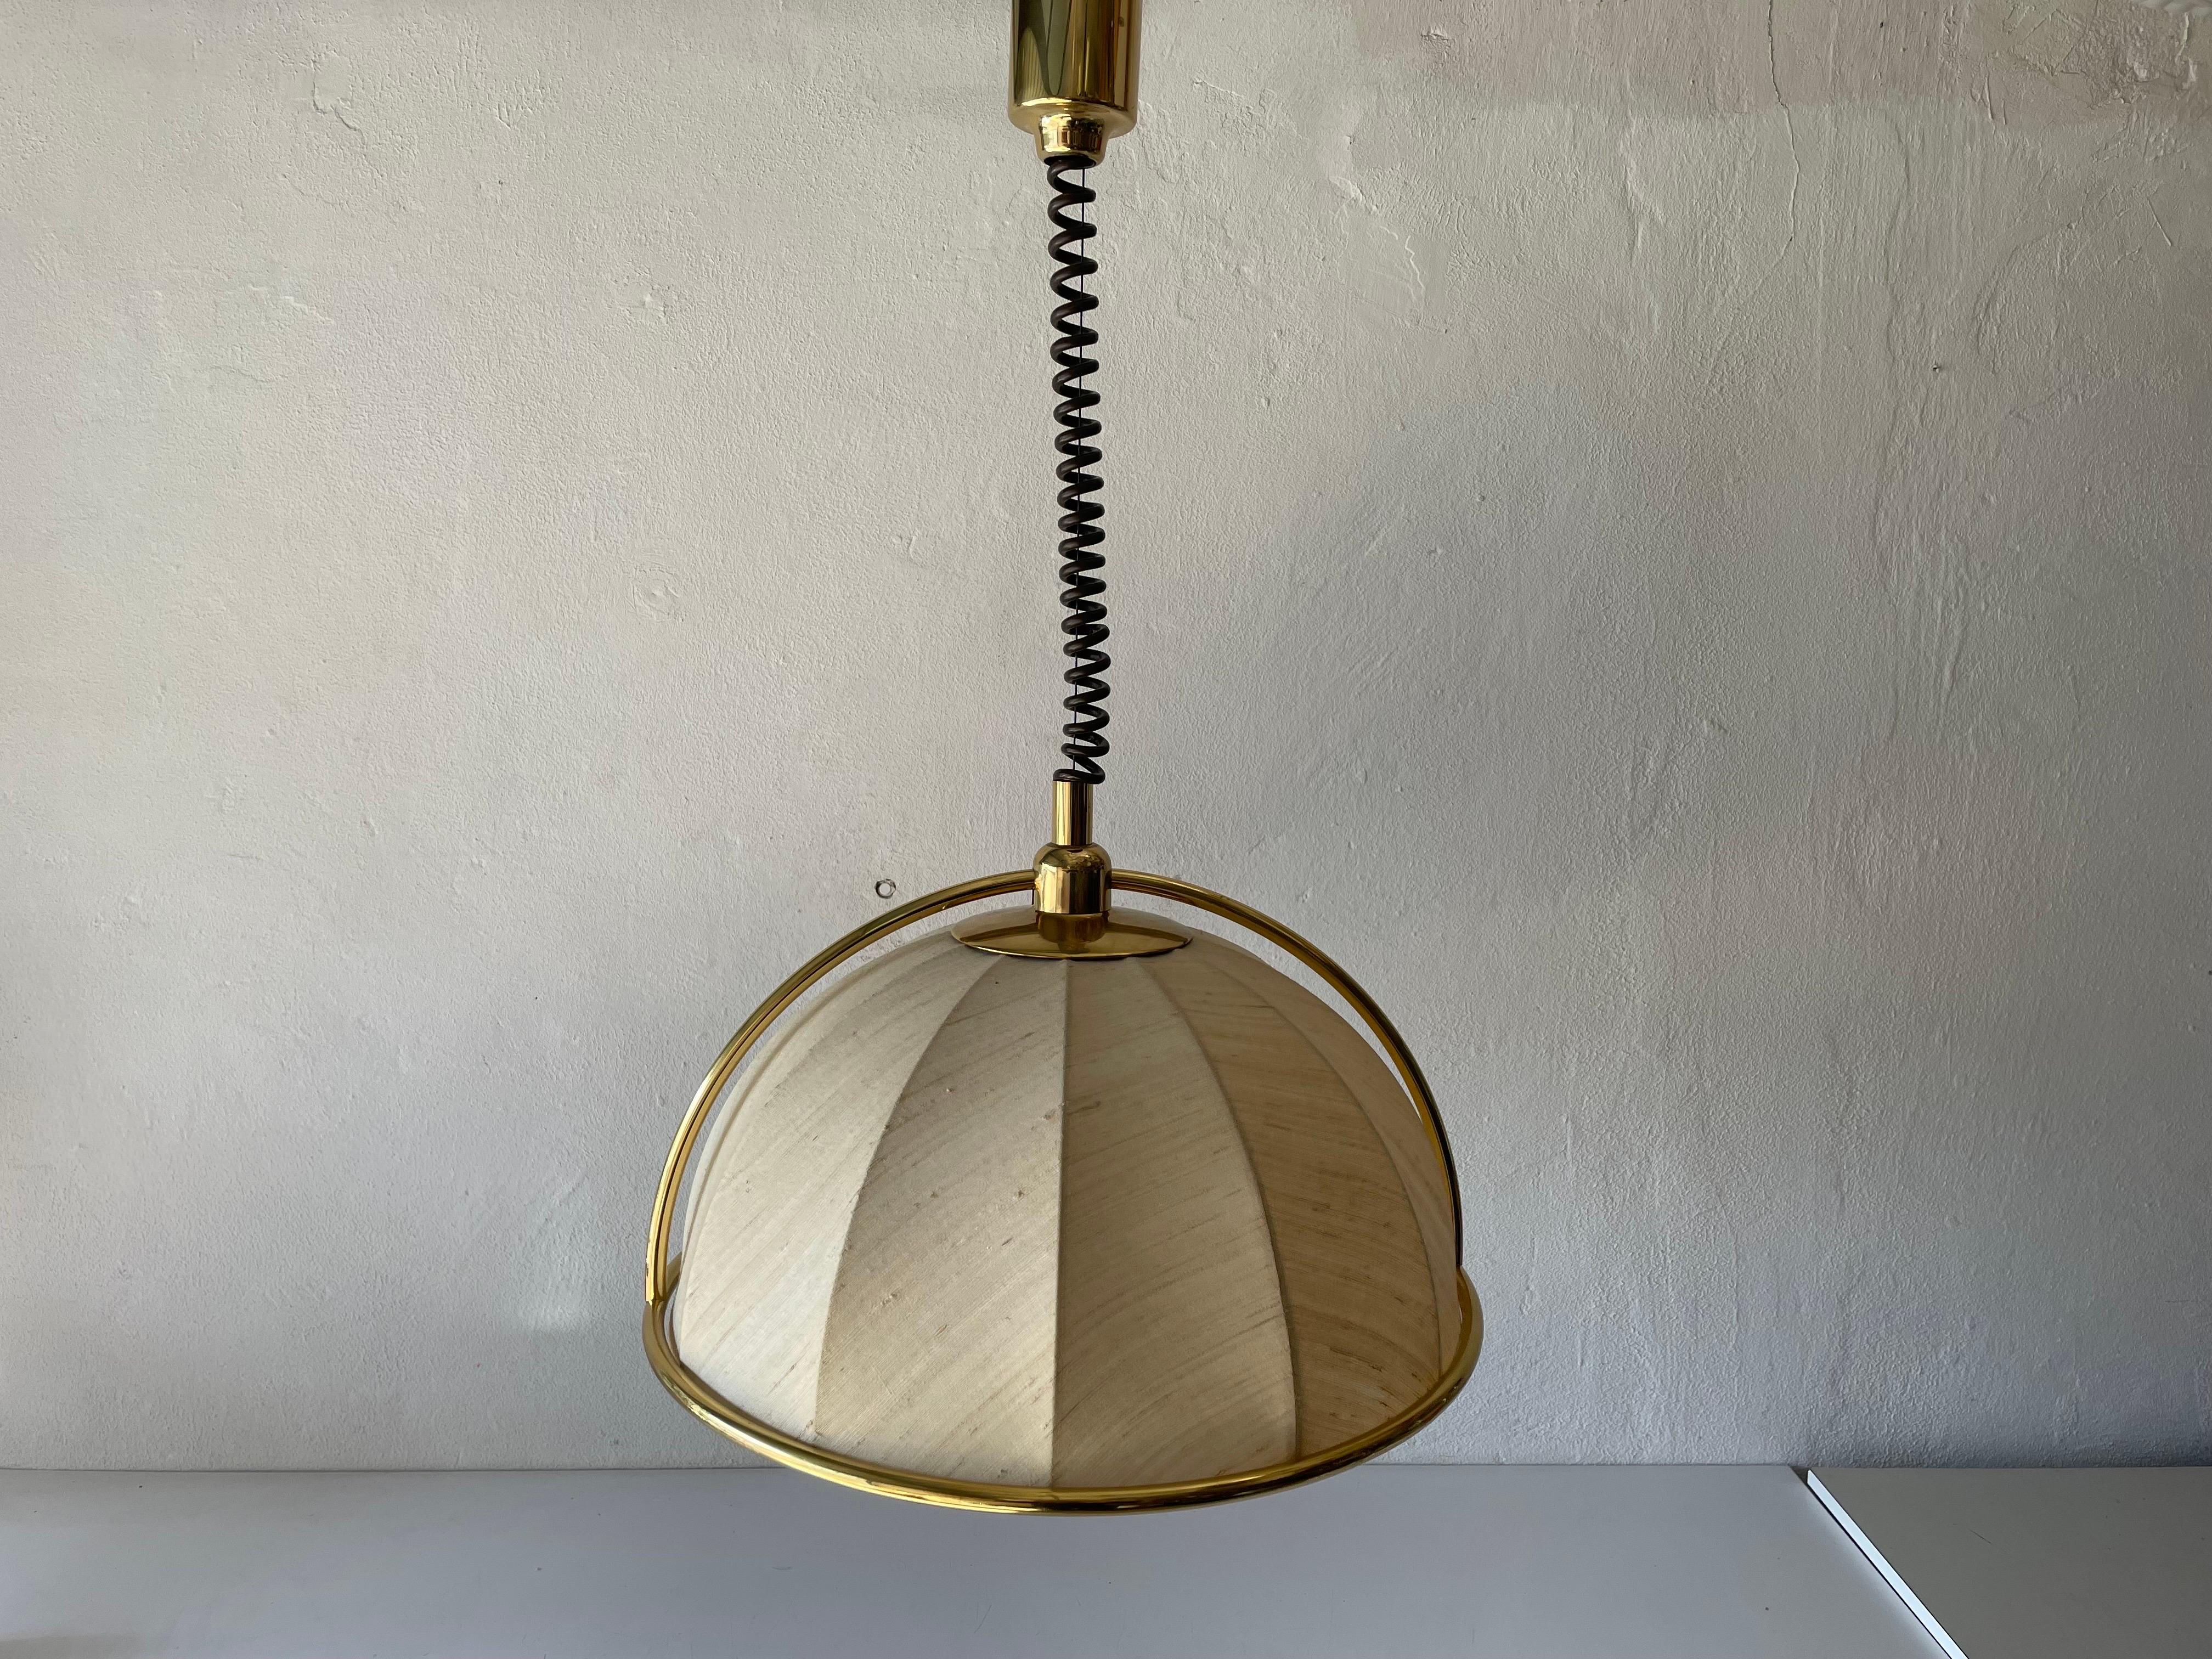 Rare brass & fabric shade pendant lamp by WKR, 1970s, Germany

Adjustable large lampshade.

Brass body & fabric shade
Manufactured in Germany

This lamp works with 3 x E27 light bulbs.

Measures: 
Shade diameter and height: 52 cm and 30